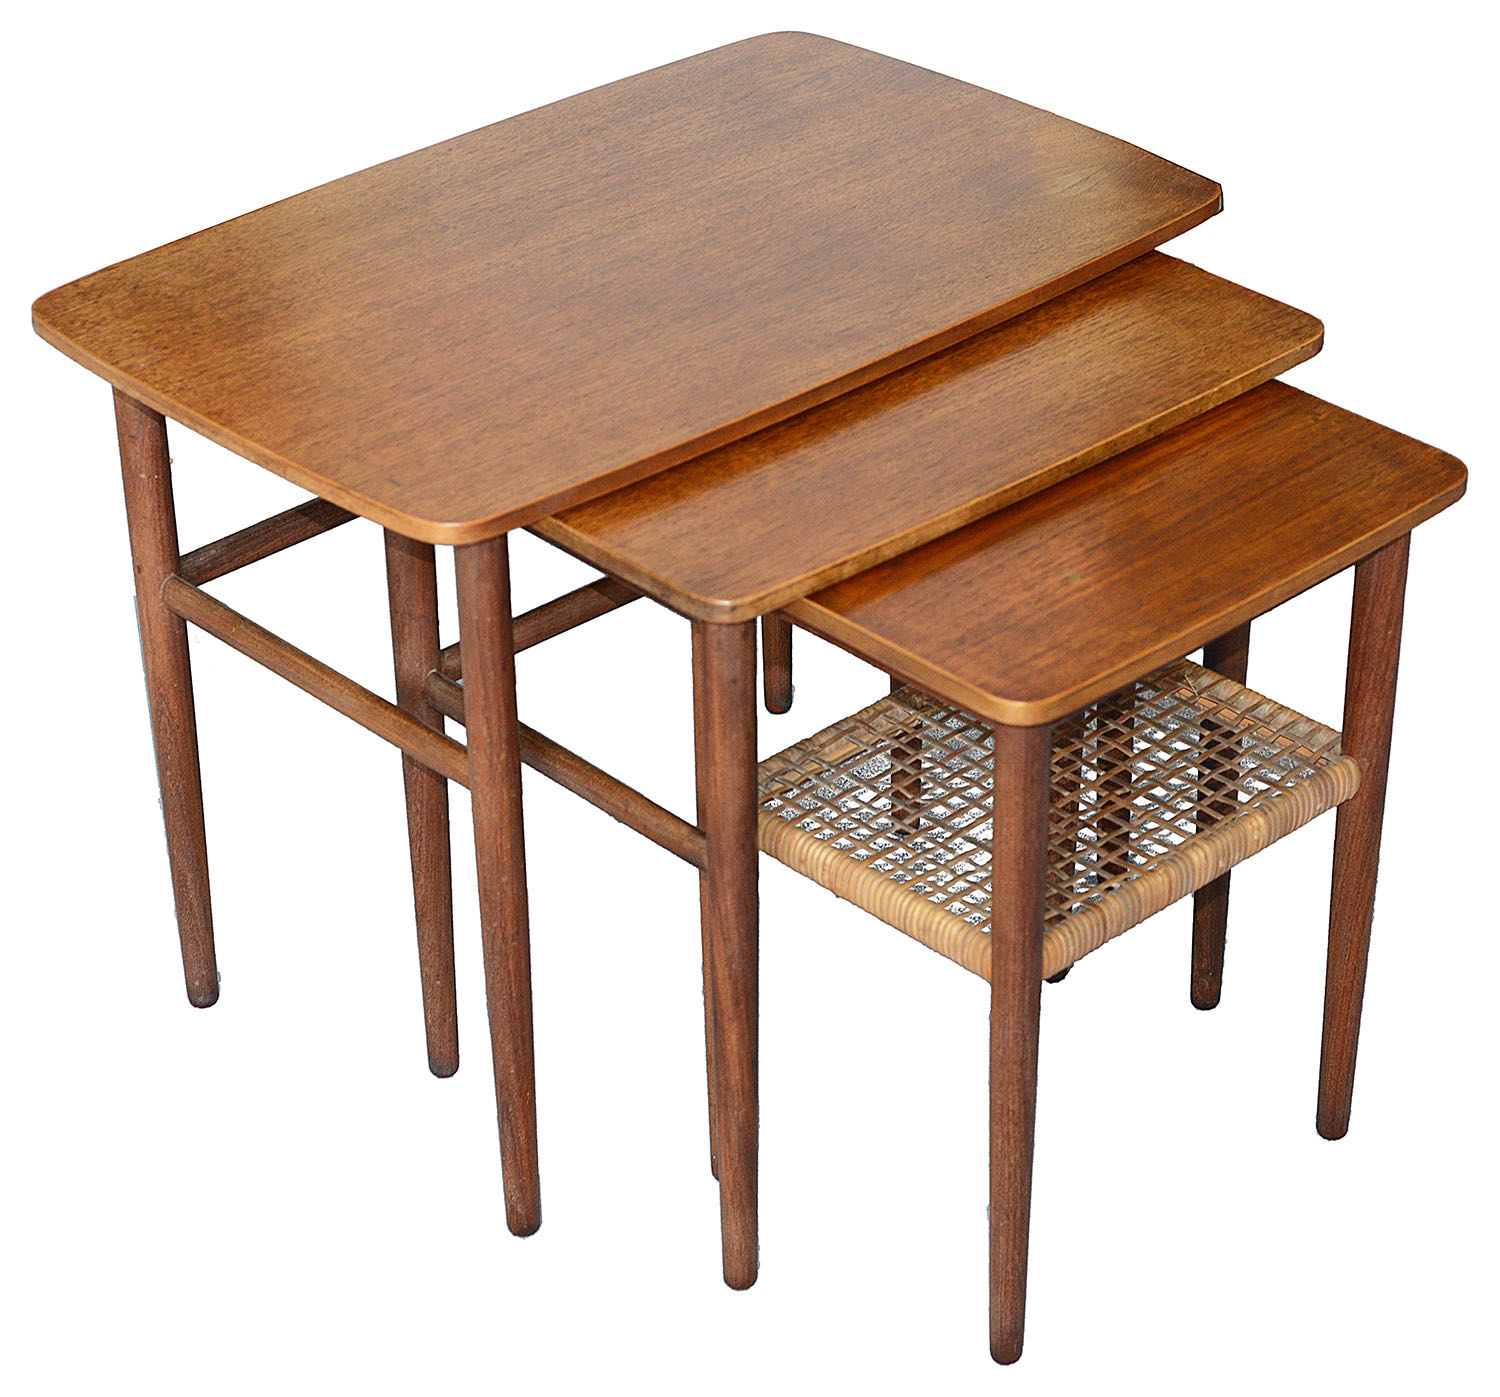 A 1960s Danish Heltborg Mobler teak and rosewood nest of three tables